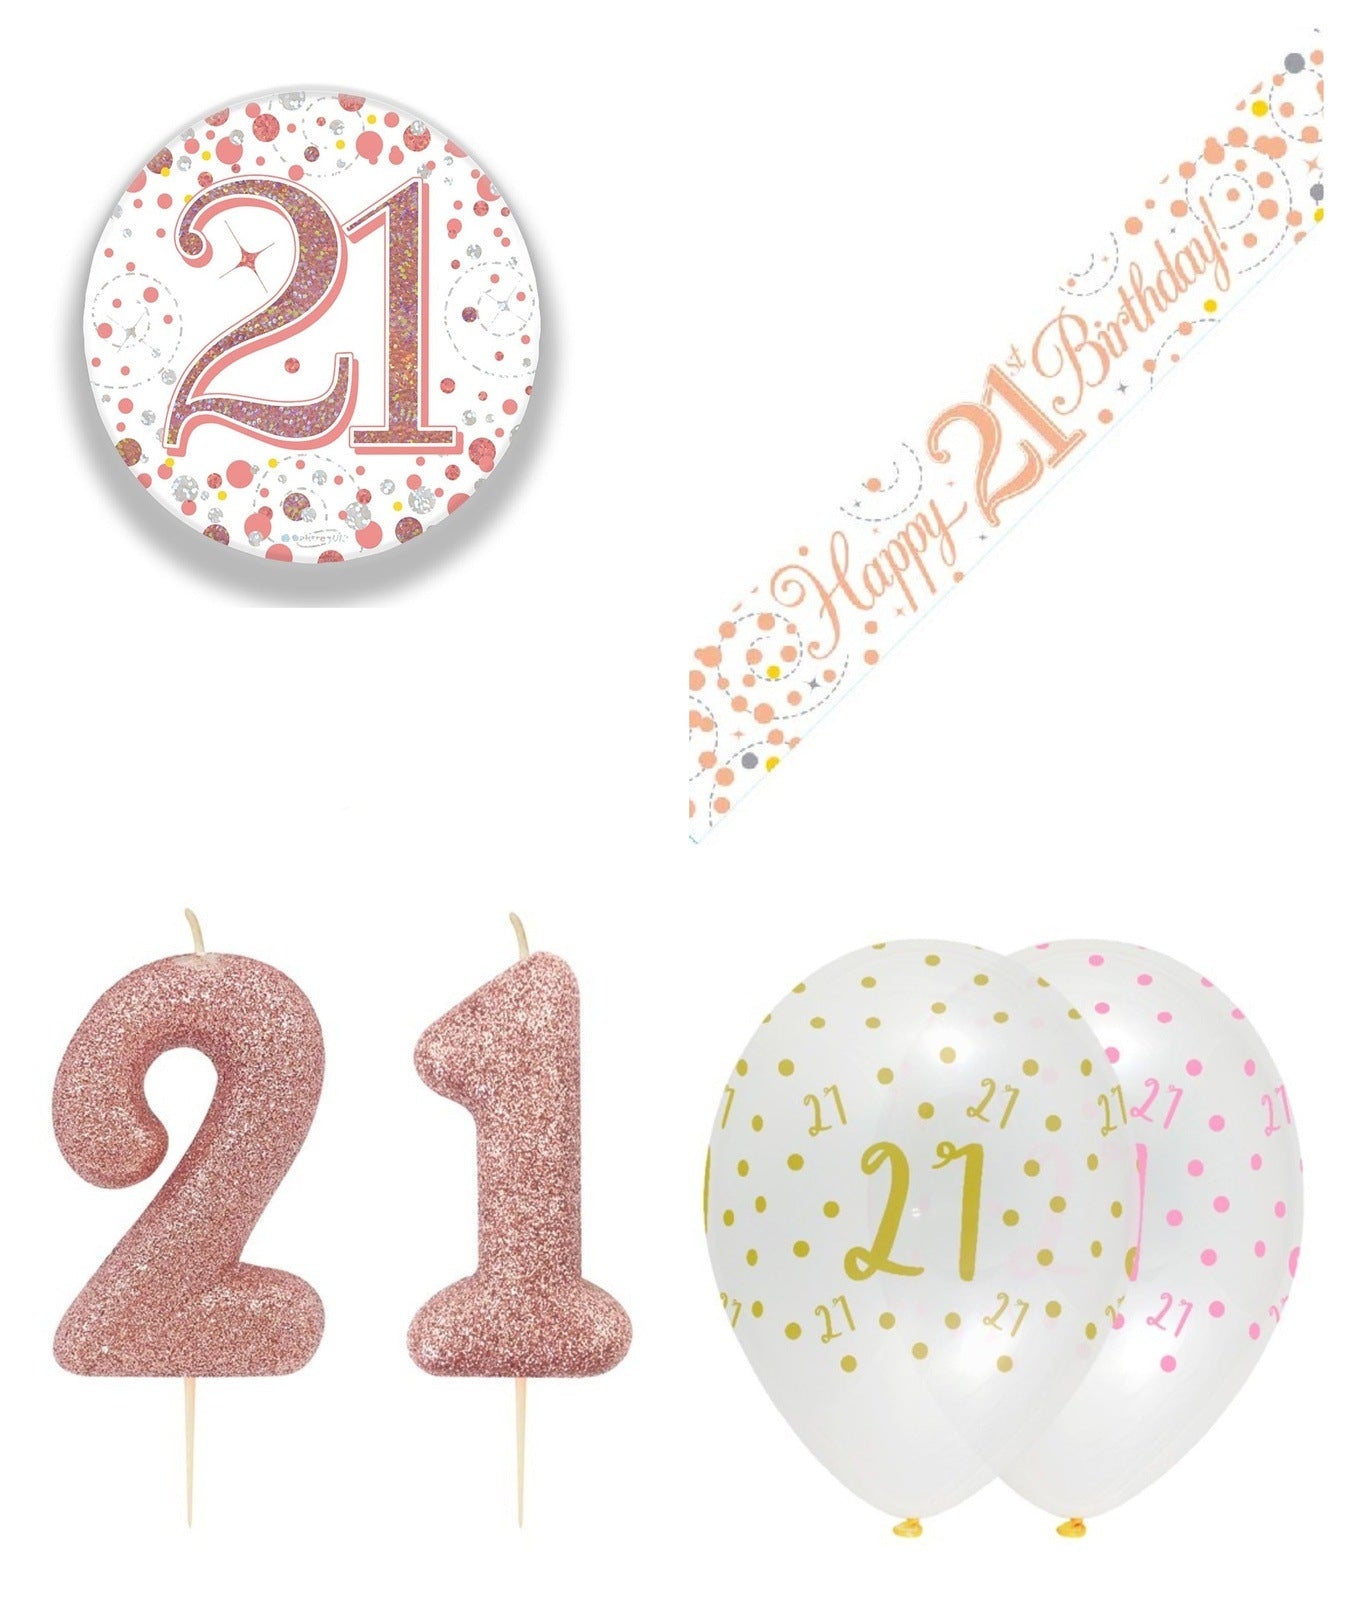 Rose Gold Bundle B Banner, Balloons, Candle, Badge Ages 16 to 90